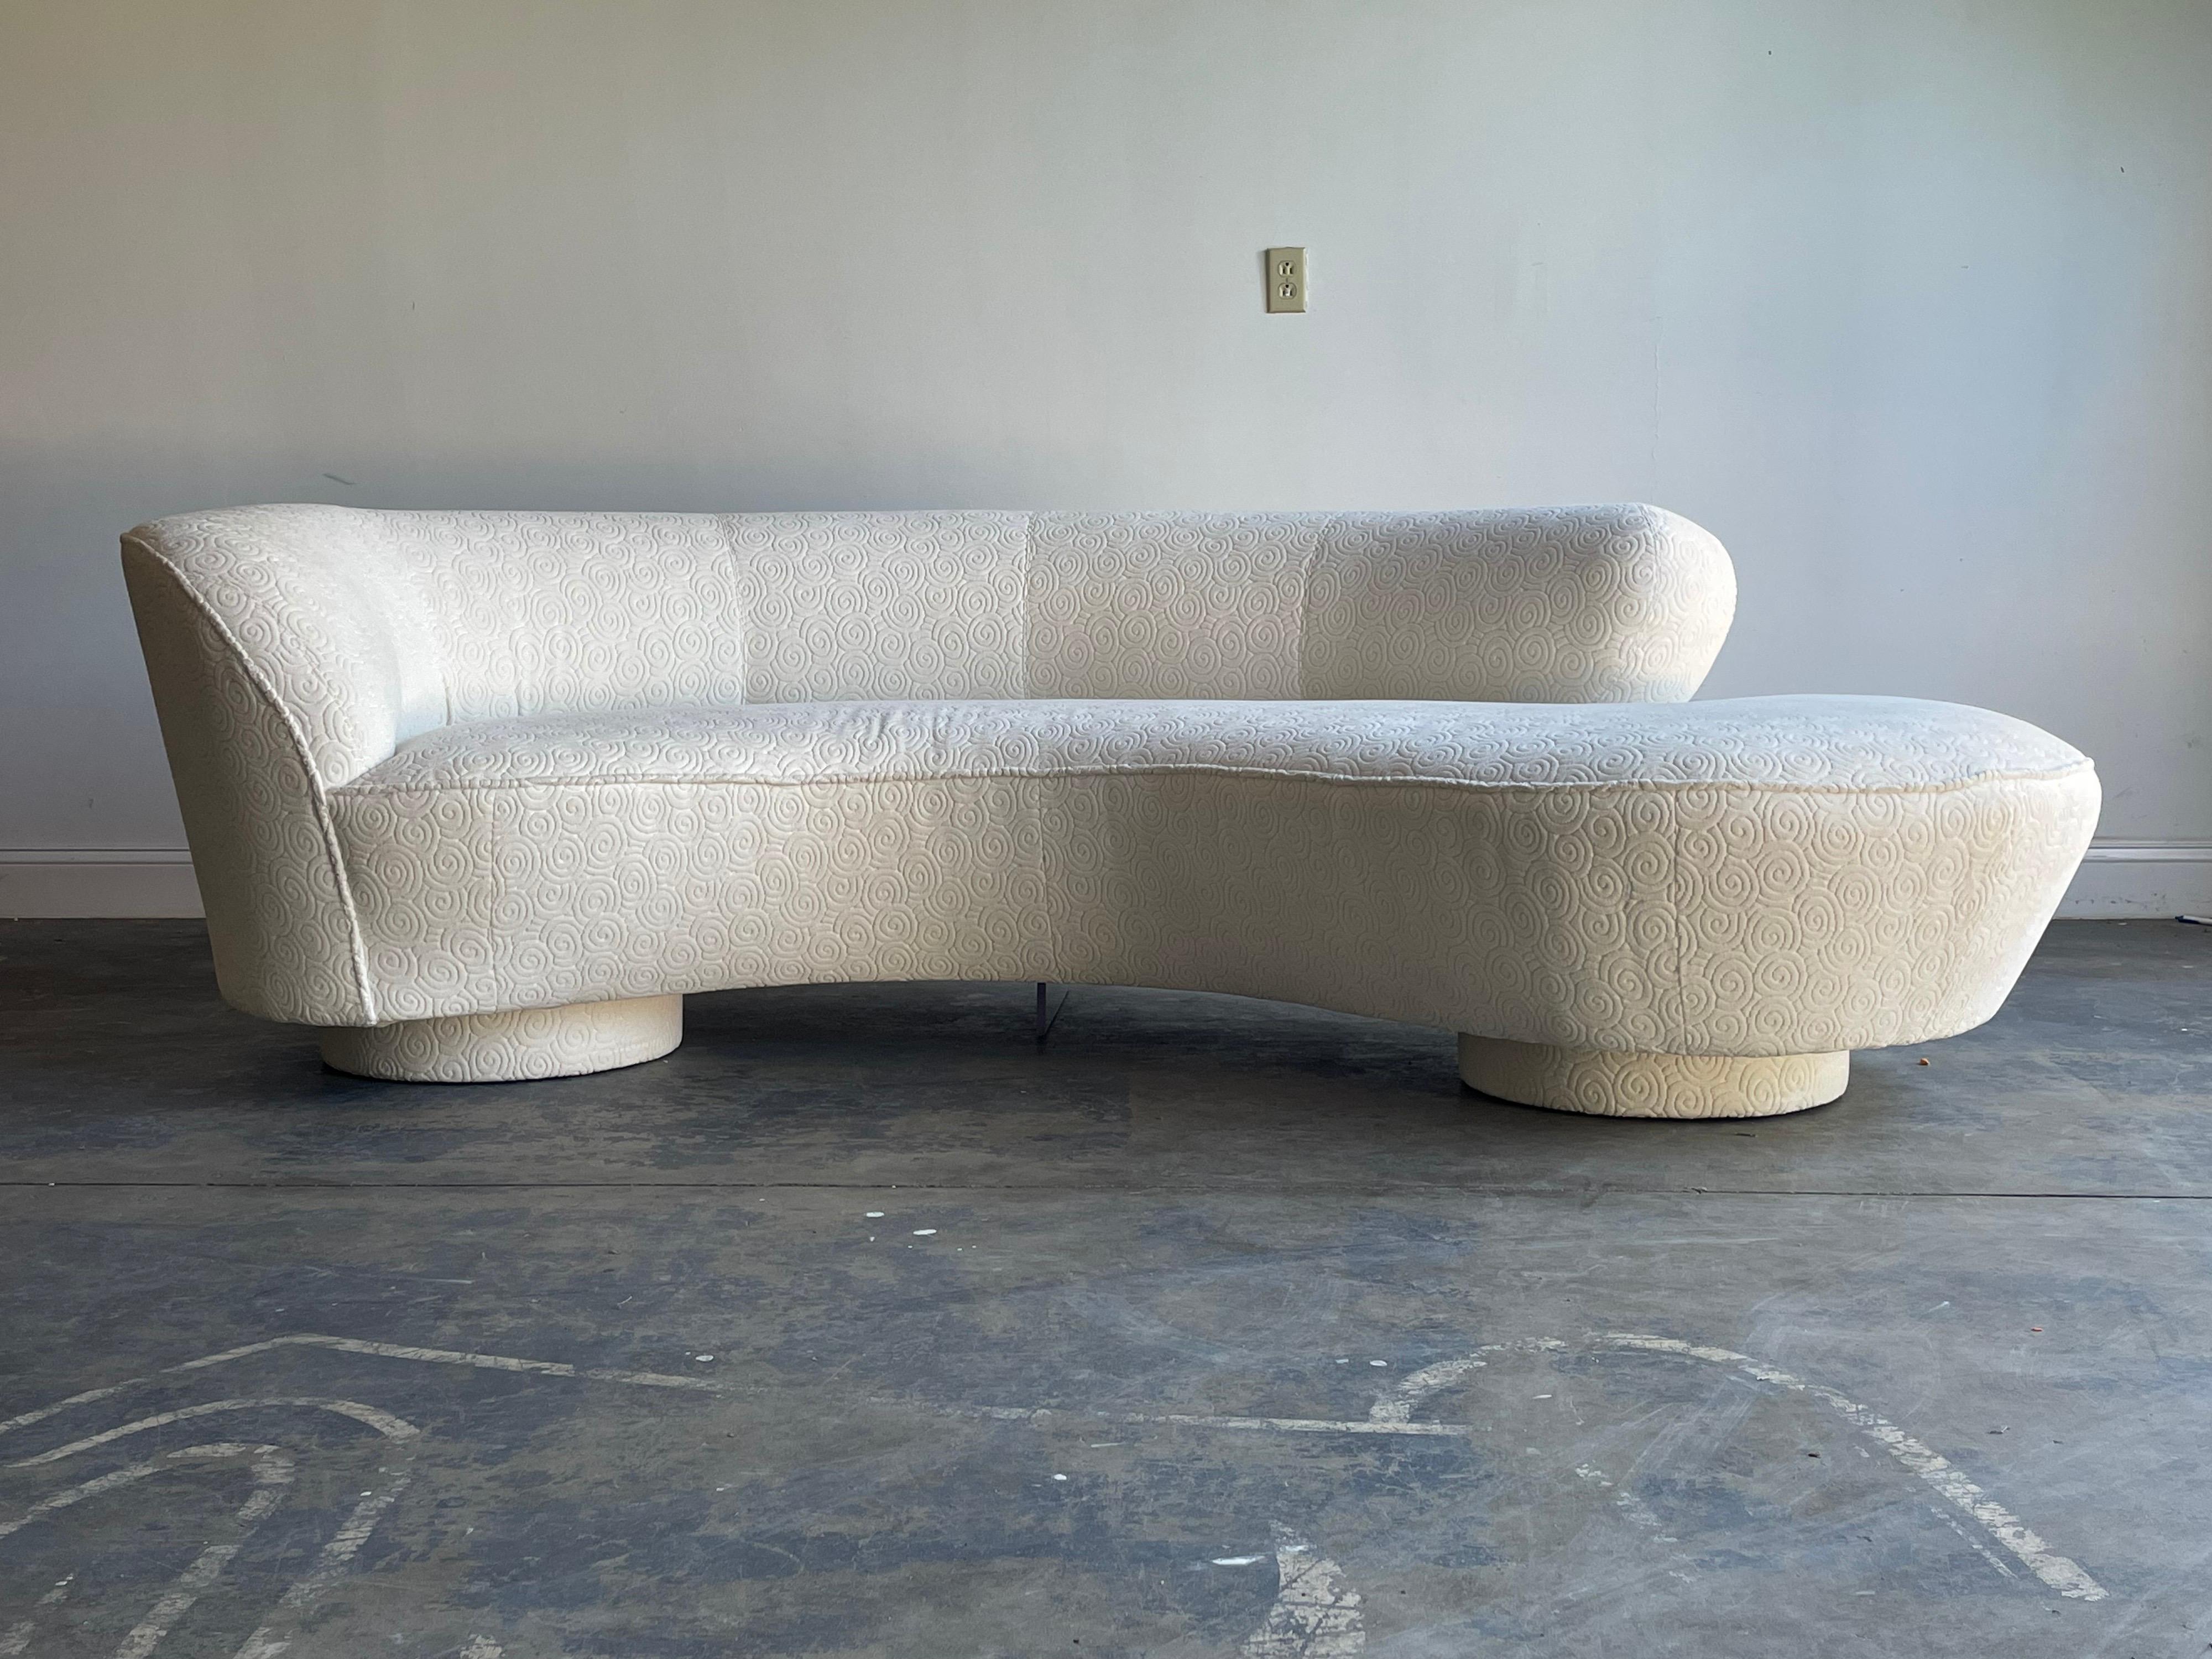 Organic Modern Vladimir Kagan Cloud Sofa for Directional with Lucite Support